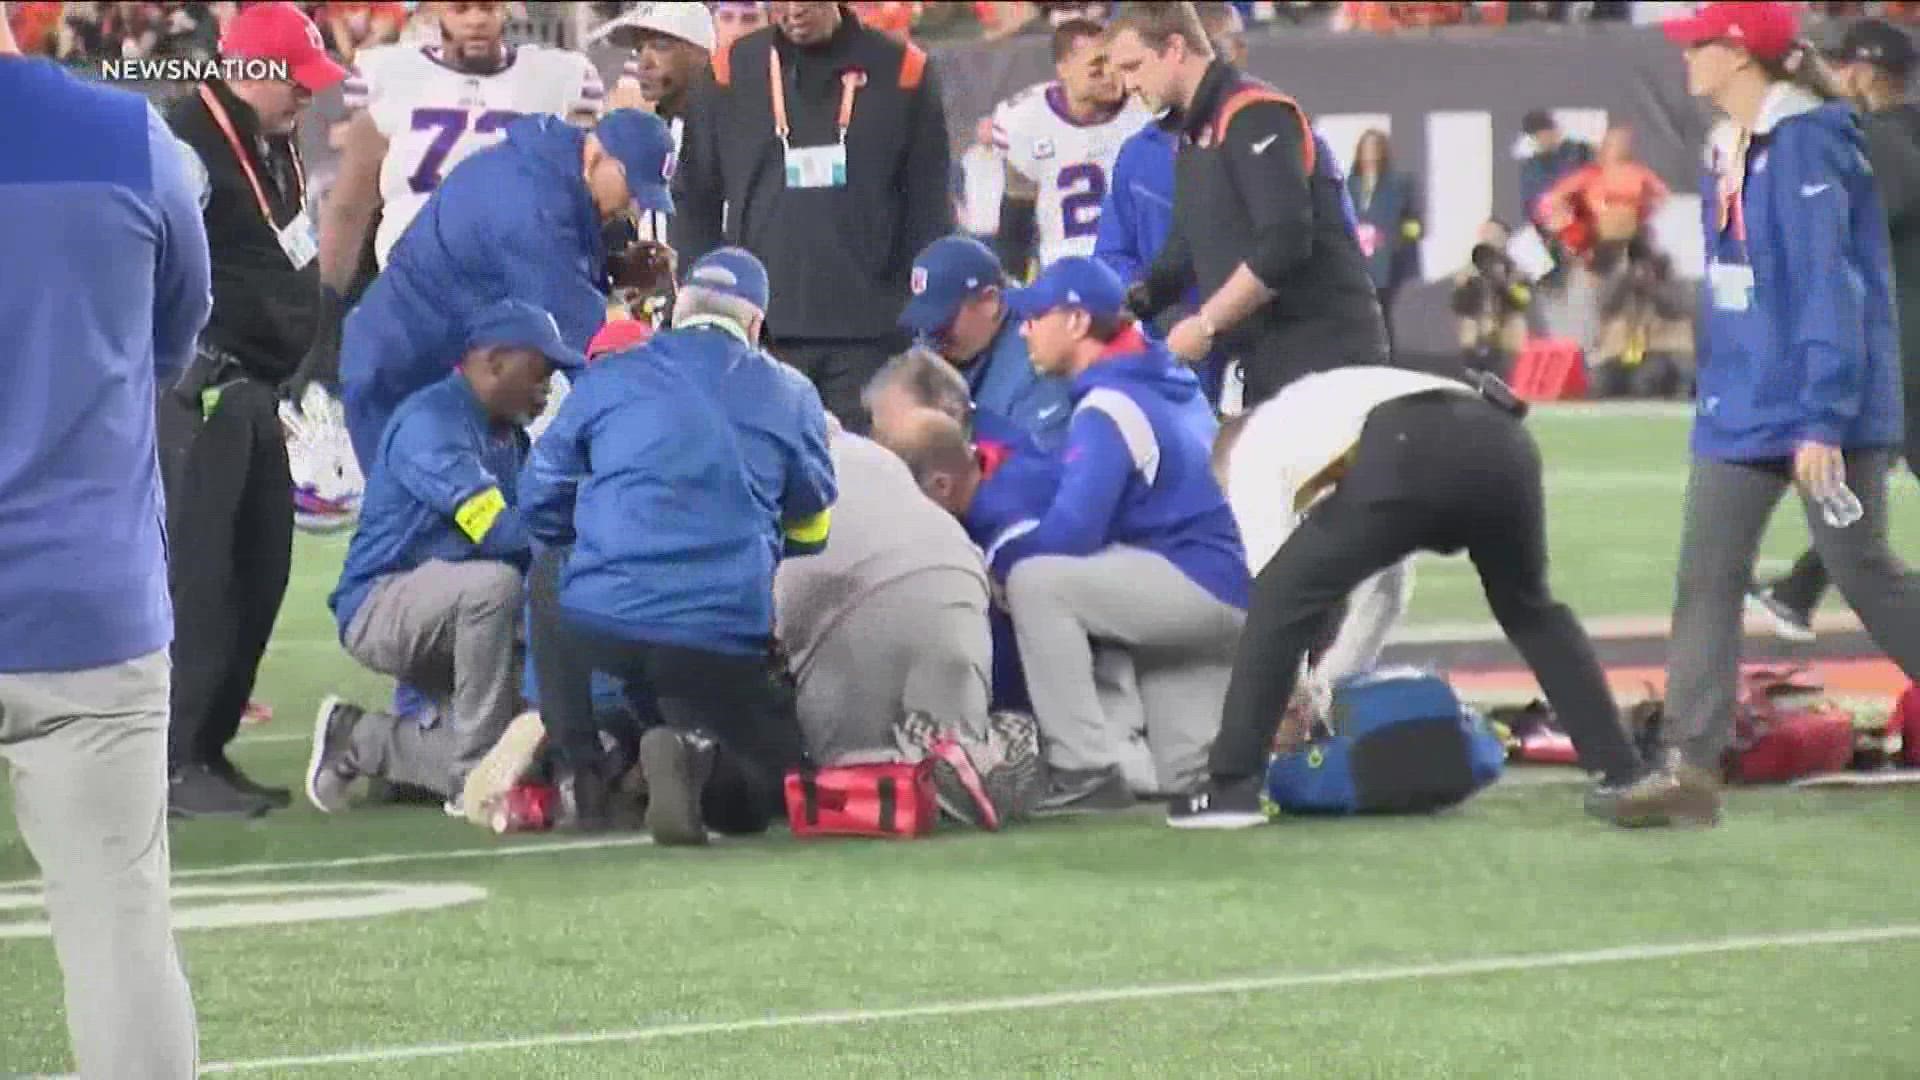 Bills' Hamlin collapses; medical events that stopped play